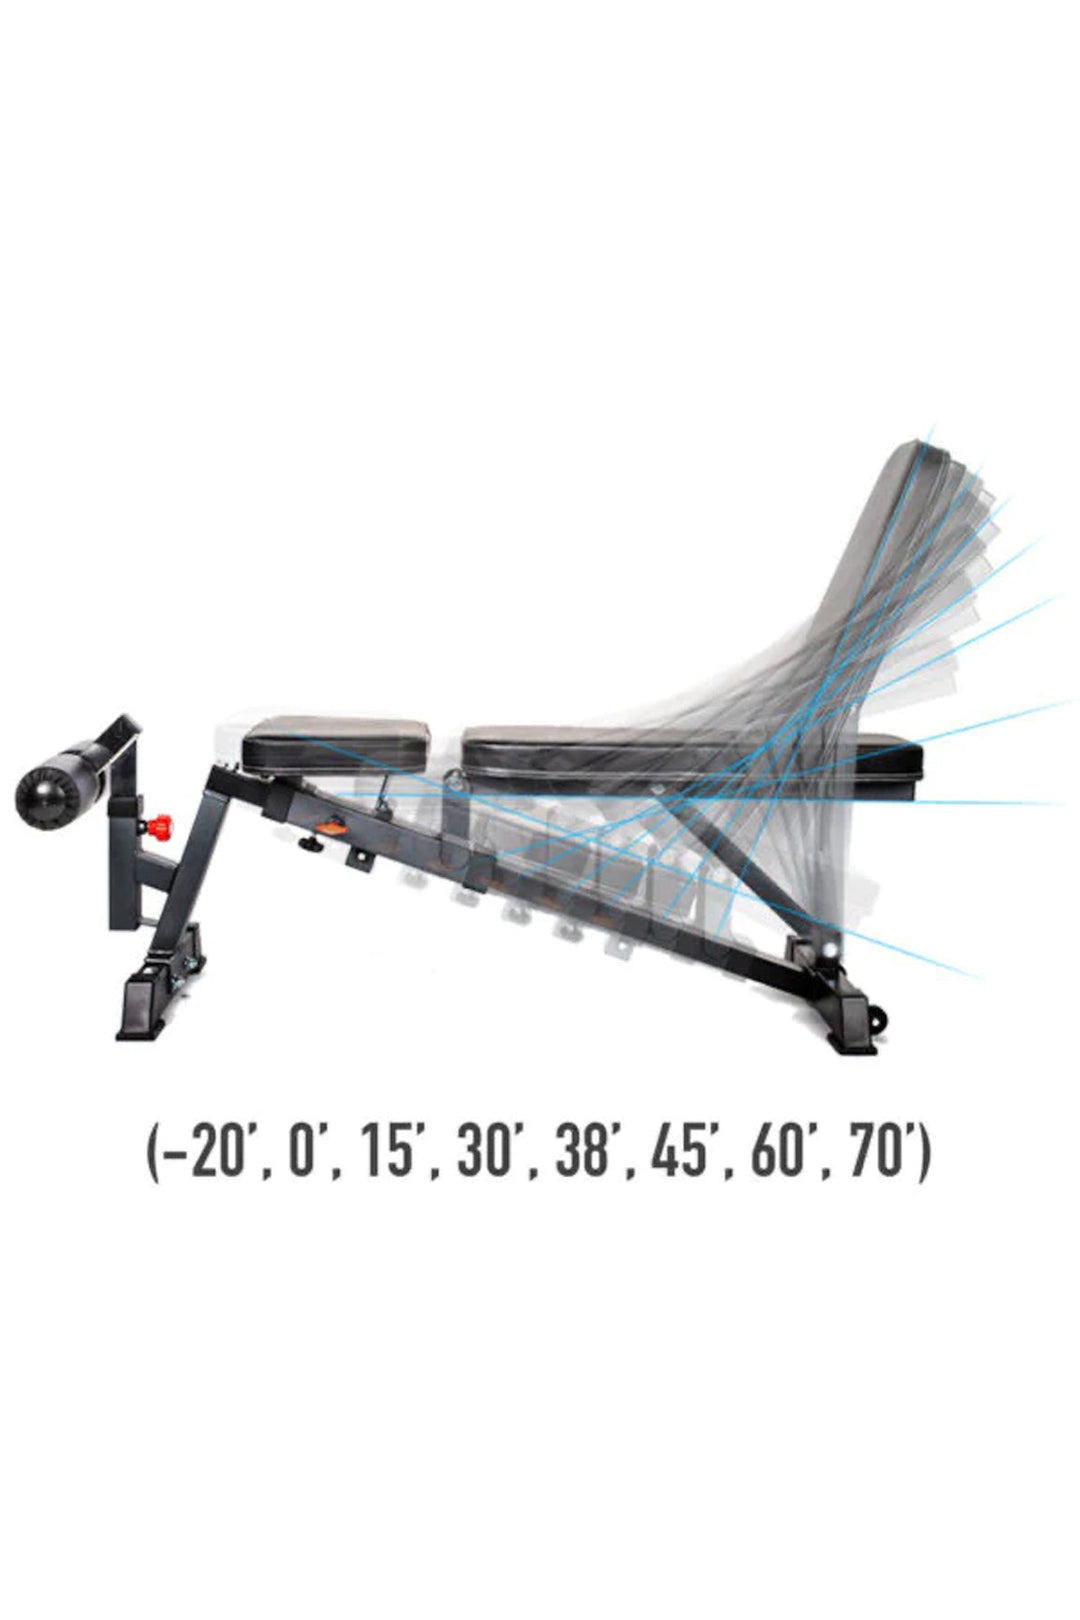 various incline positionings of adjustable weight bench